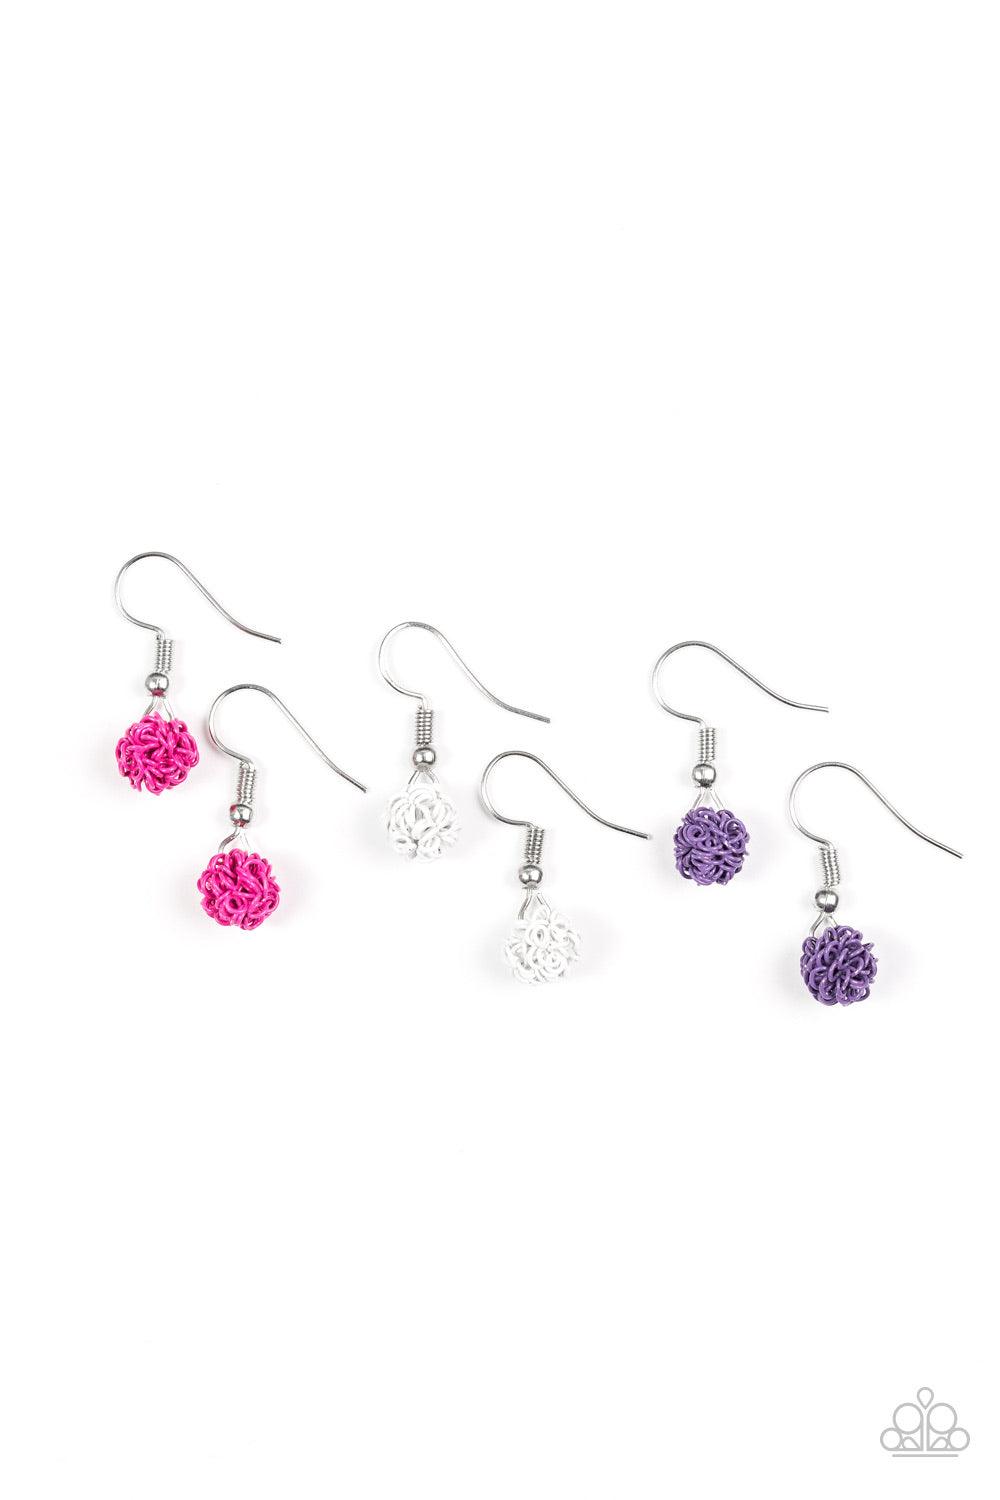 Paparazzi Accessories Starlet Shimmer Earrings: #1 ~Red Red Earrings ONLY *Color Not Shown